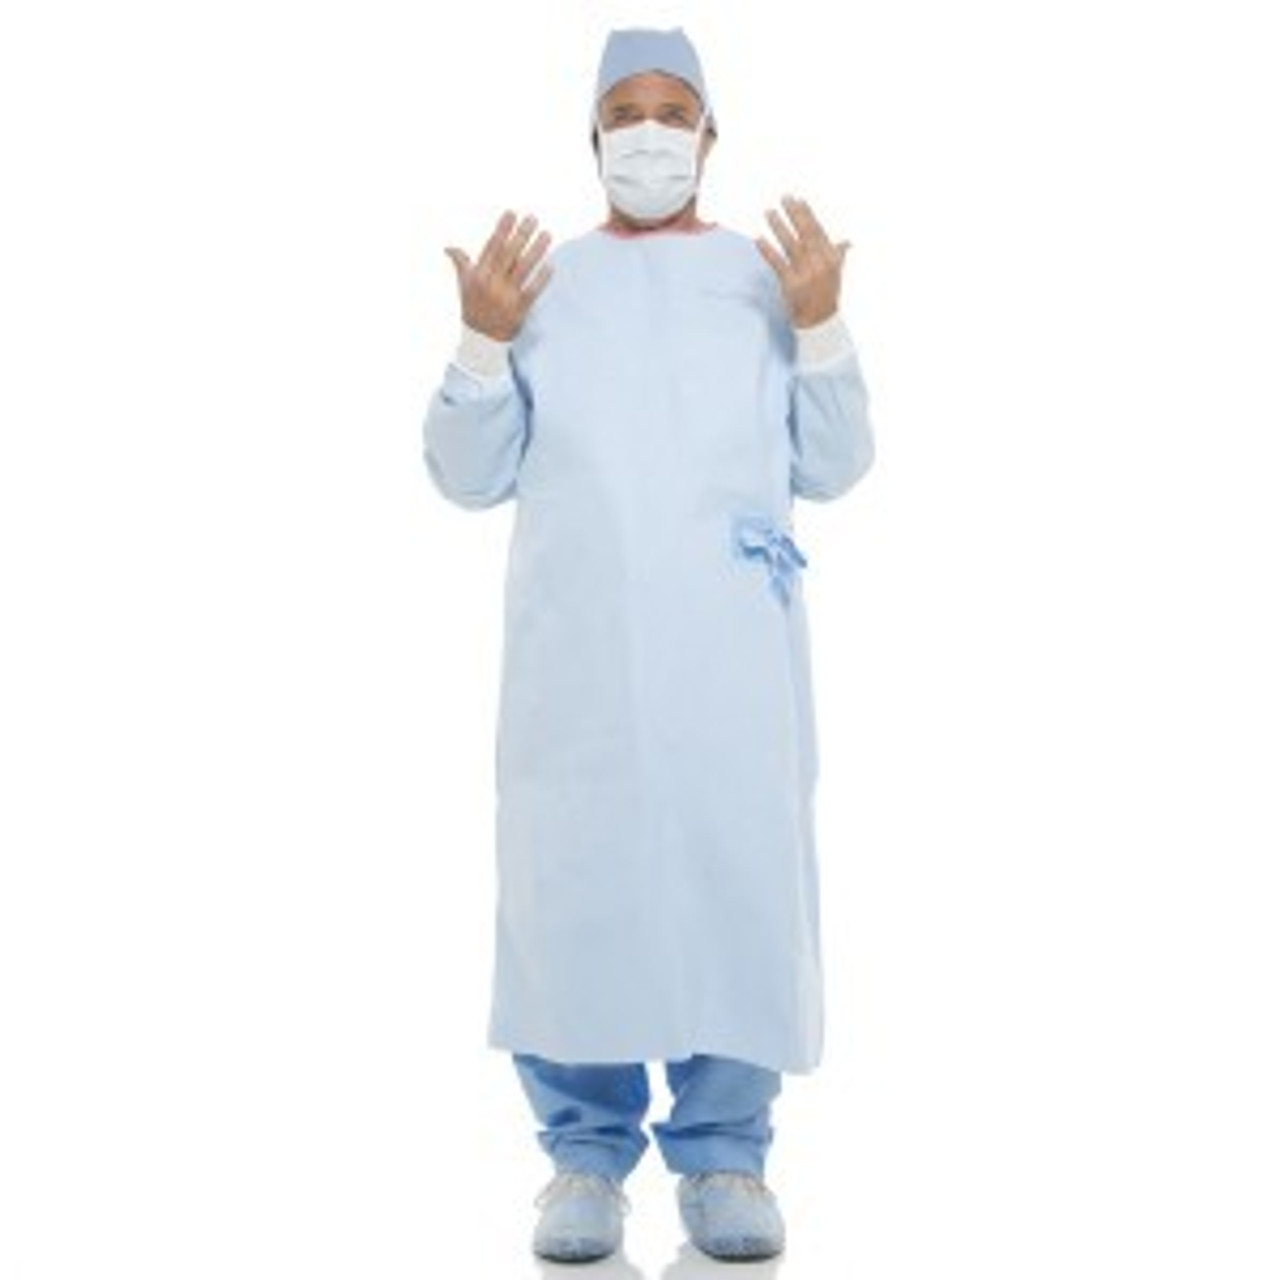 Halyard Kimguard Surgical Impervious Gown, Sterile, X-Large, 26/cs